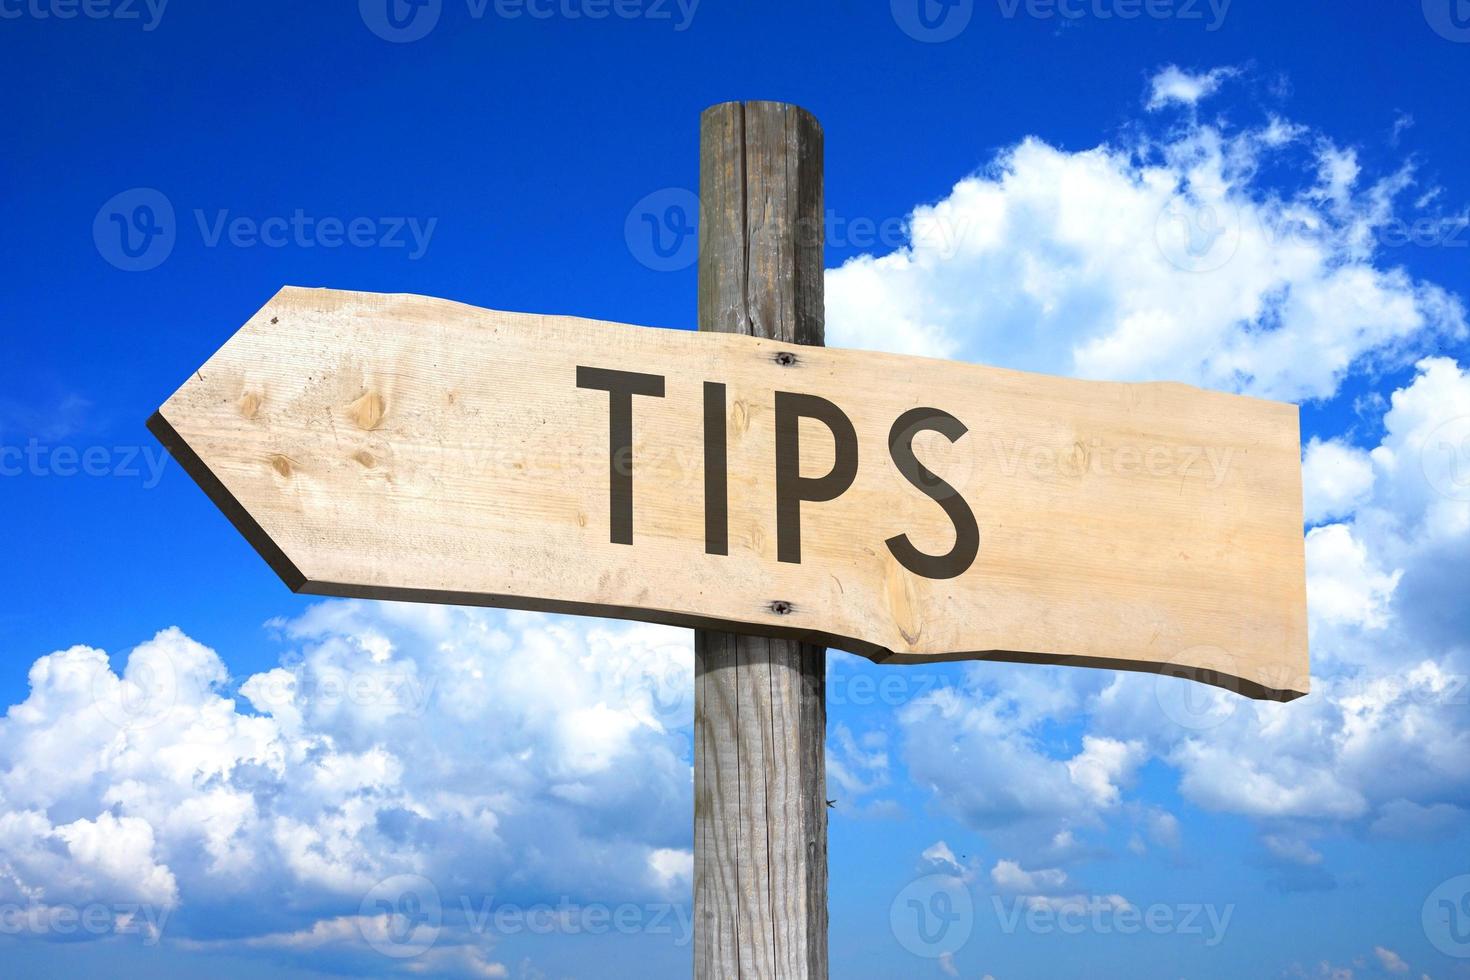 Tips - Wooden Signpost with one Arrow, Sky with Clouds in Background photo